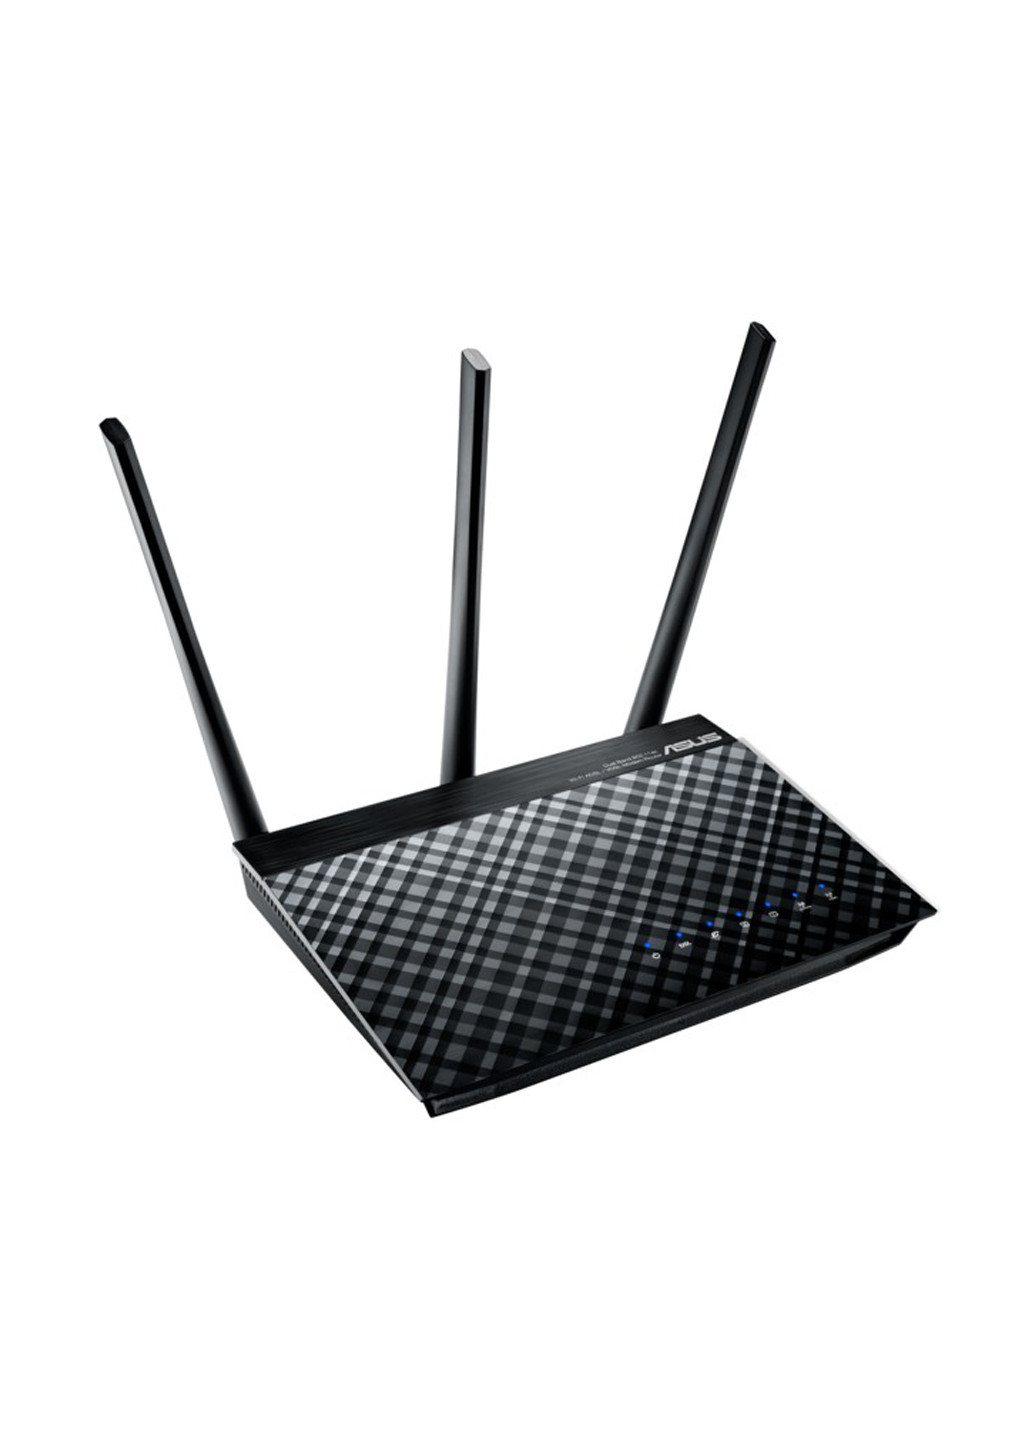 Маршрутизатор DSL-AC51 Asus маршрутизатор asus dsl-ac51 (135861121)